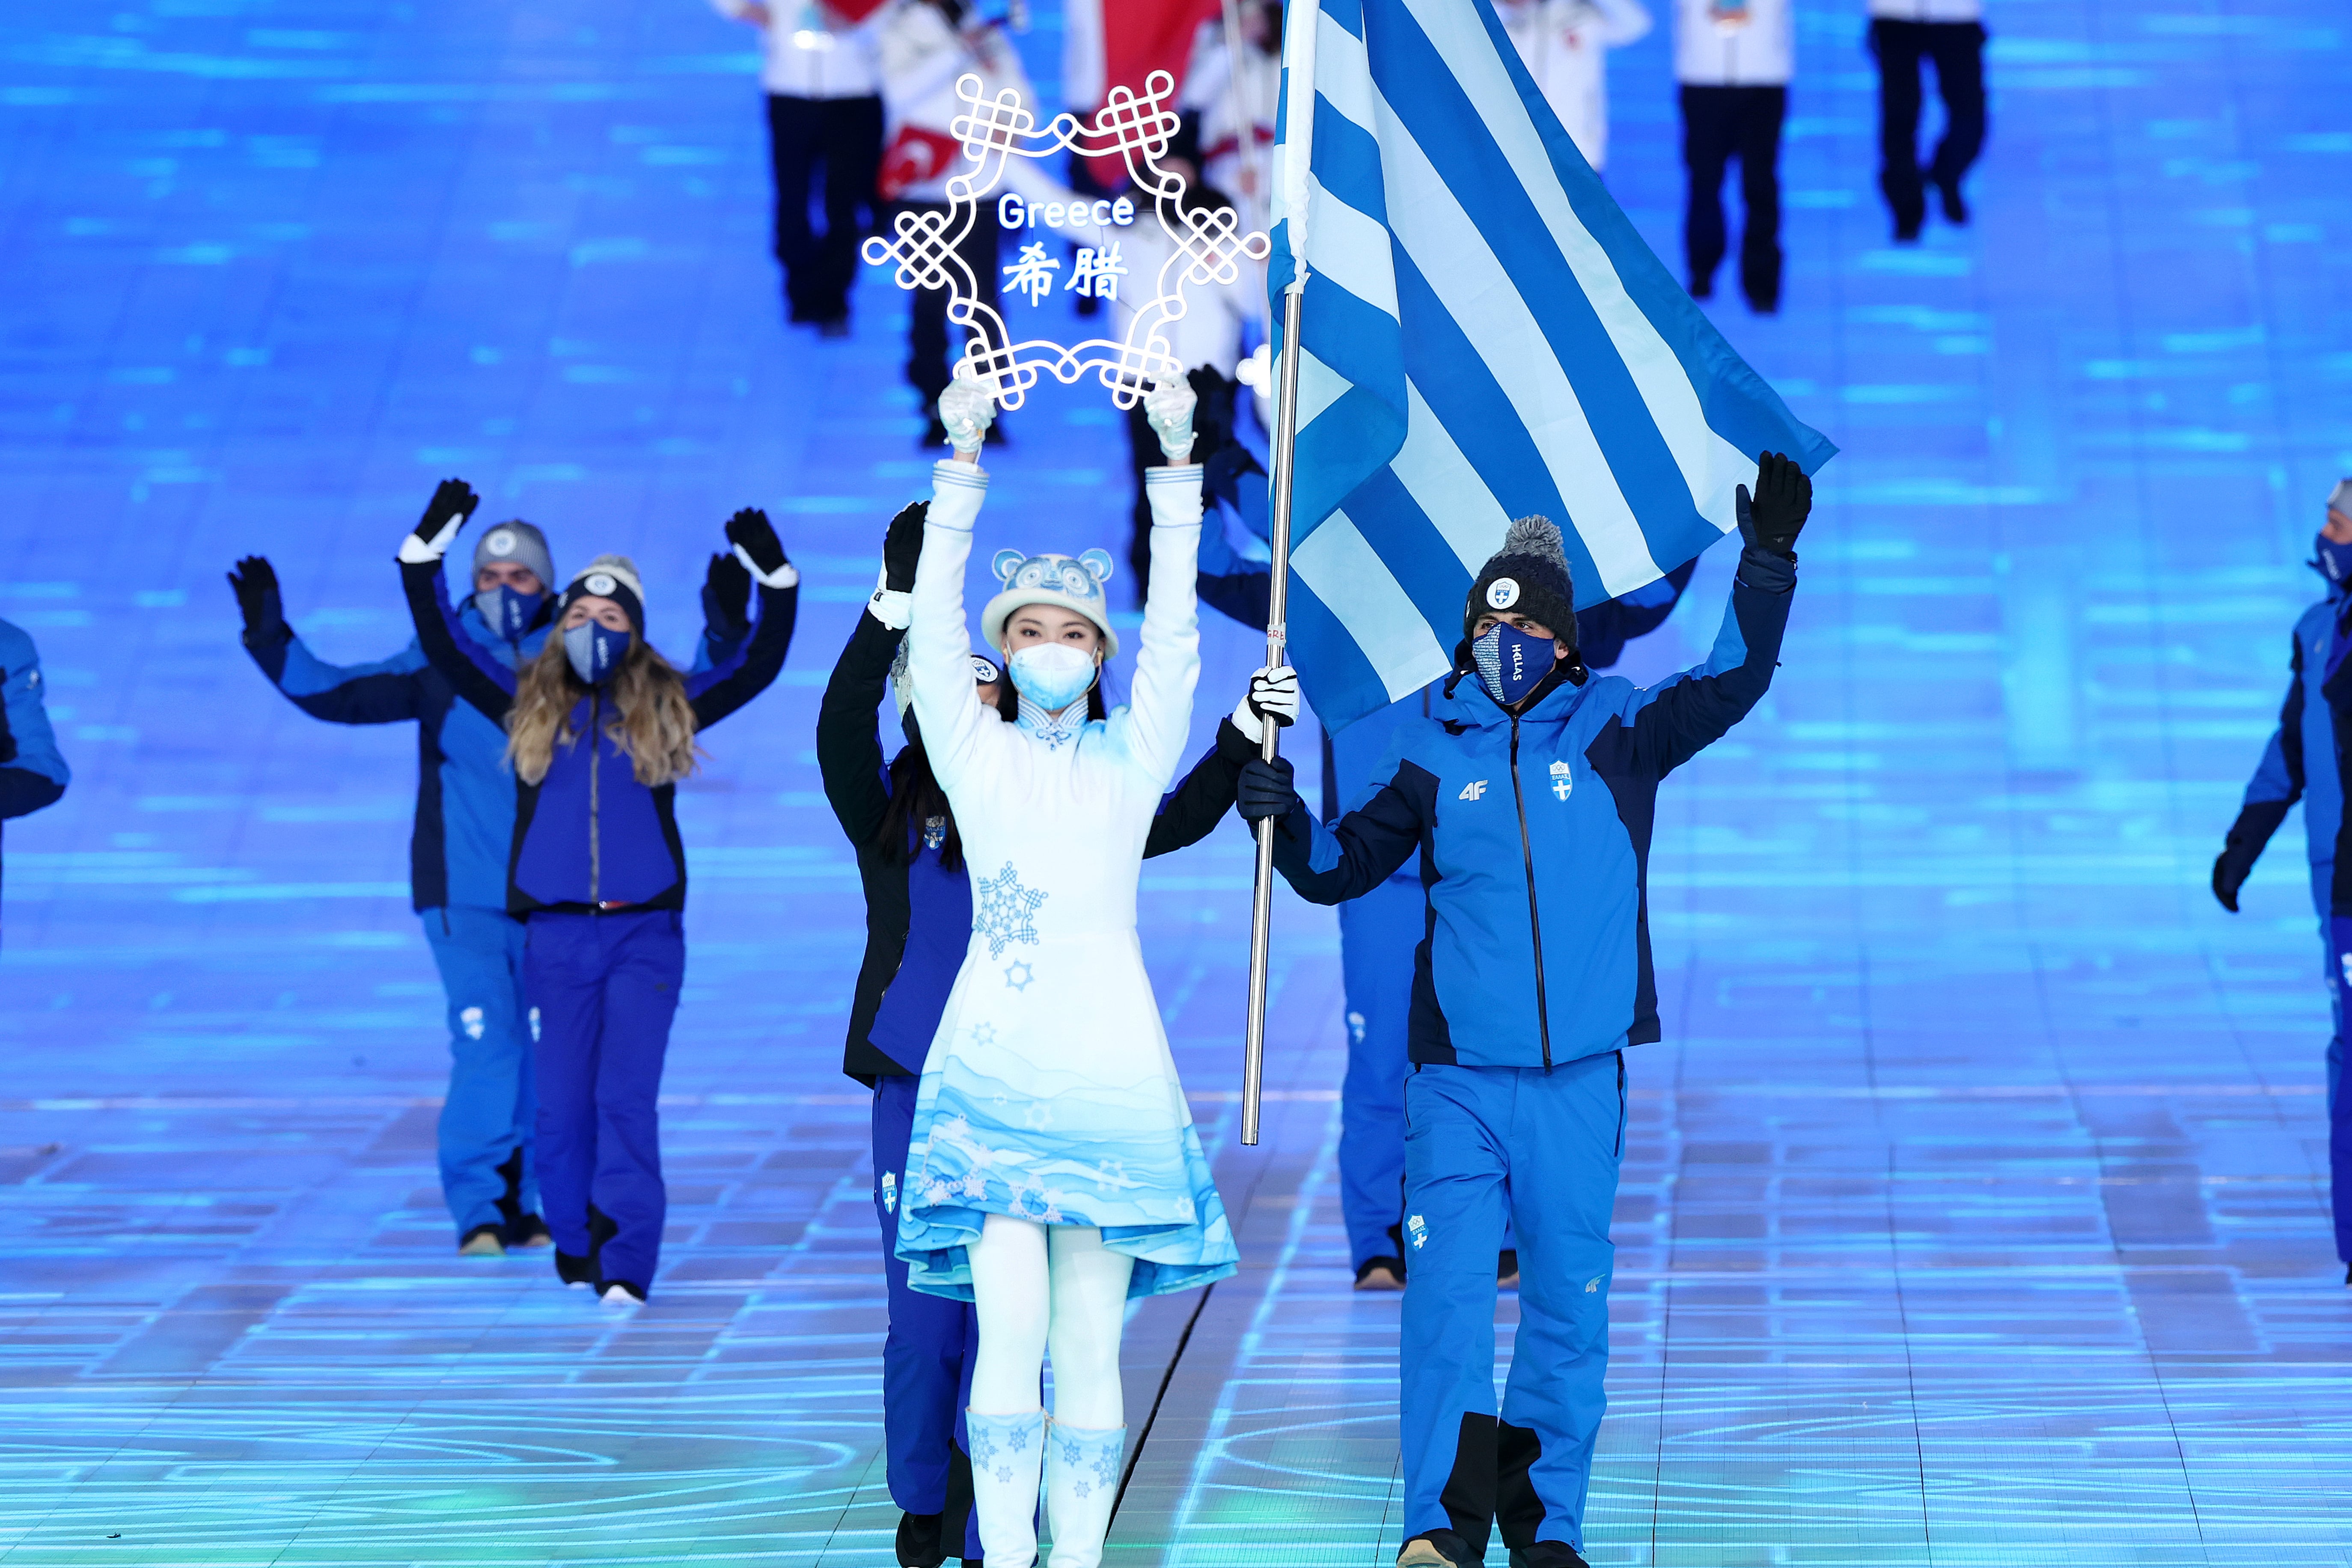 Why Greece Enters First in the Olympic Parade of Nations POPSUGAR Fitness